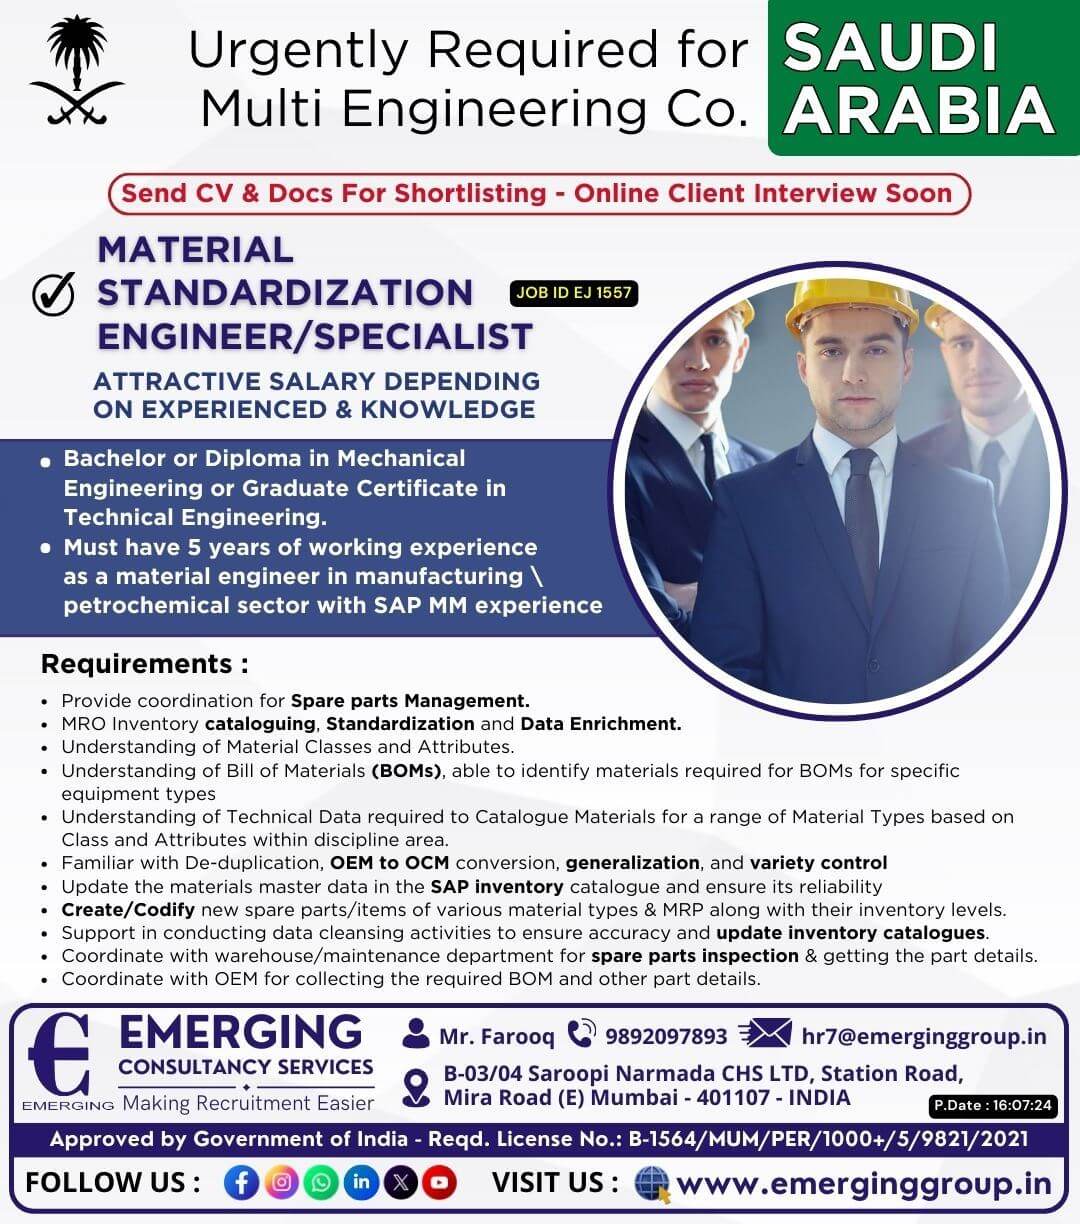 Urgently Required for Multi Engineering Company in Saudi Arabia - Interview Soon